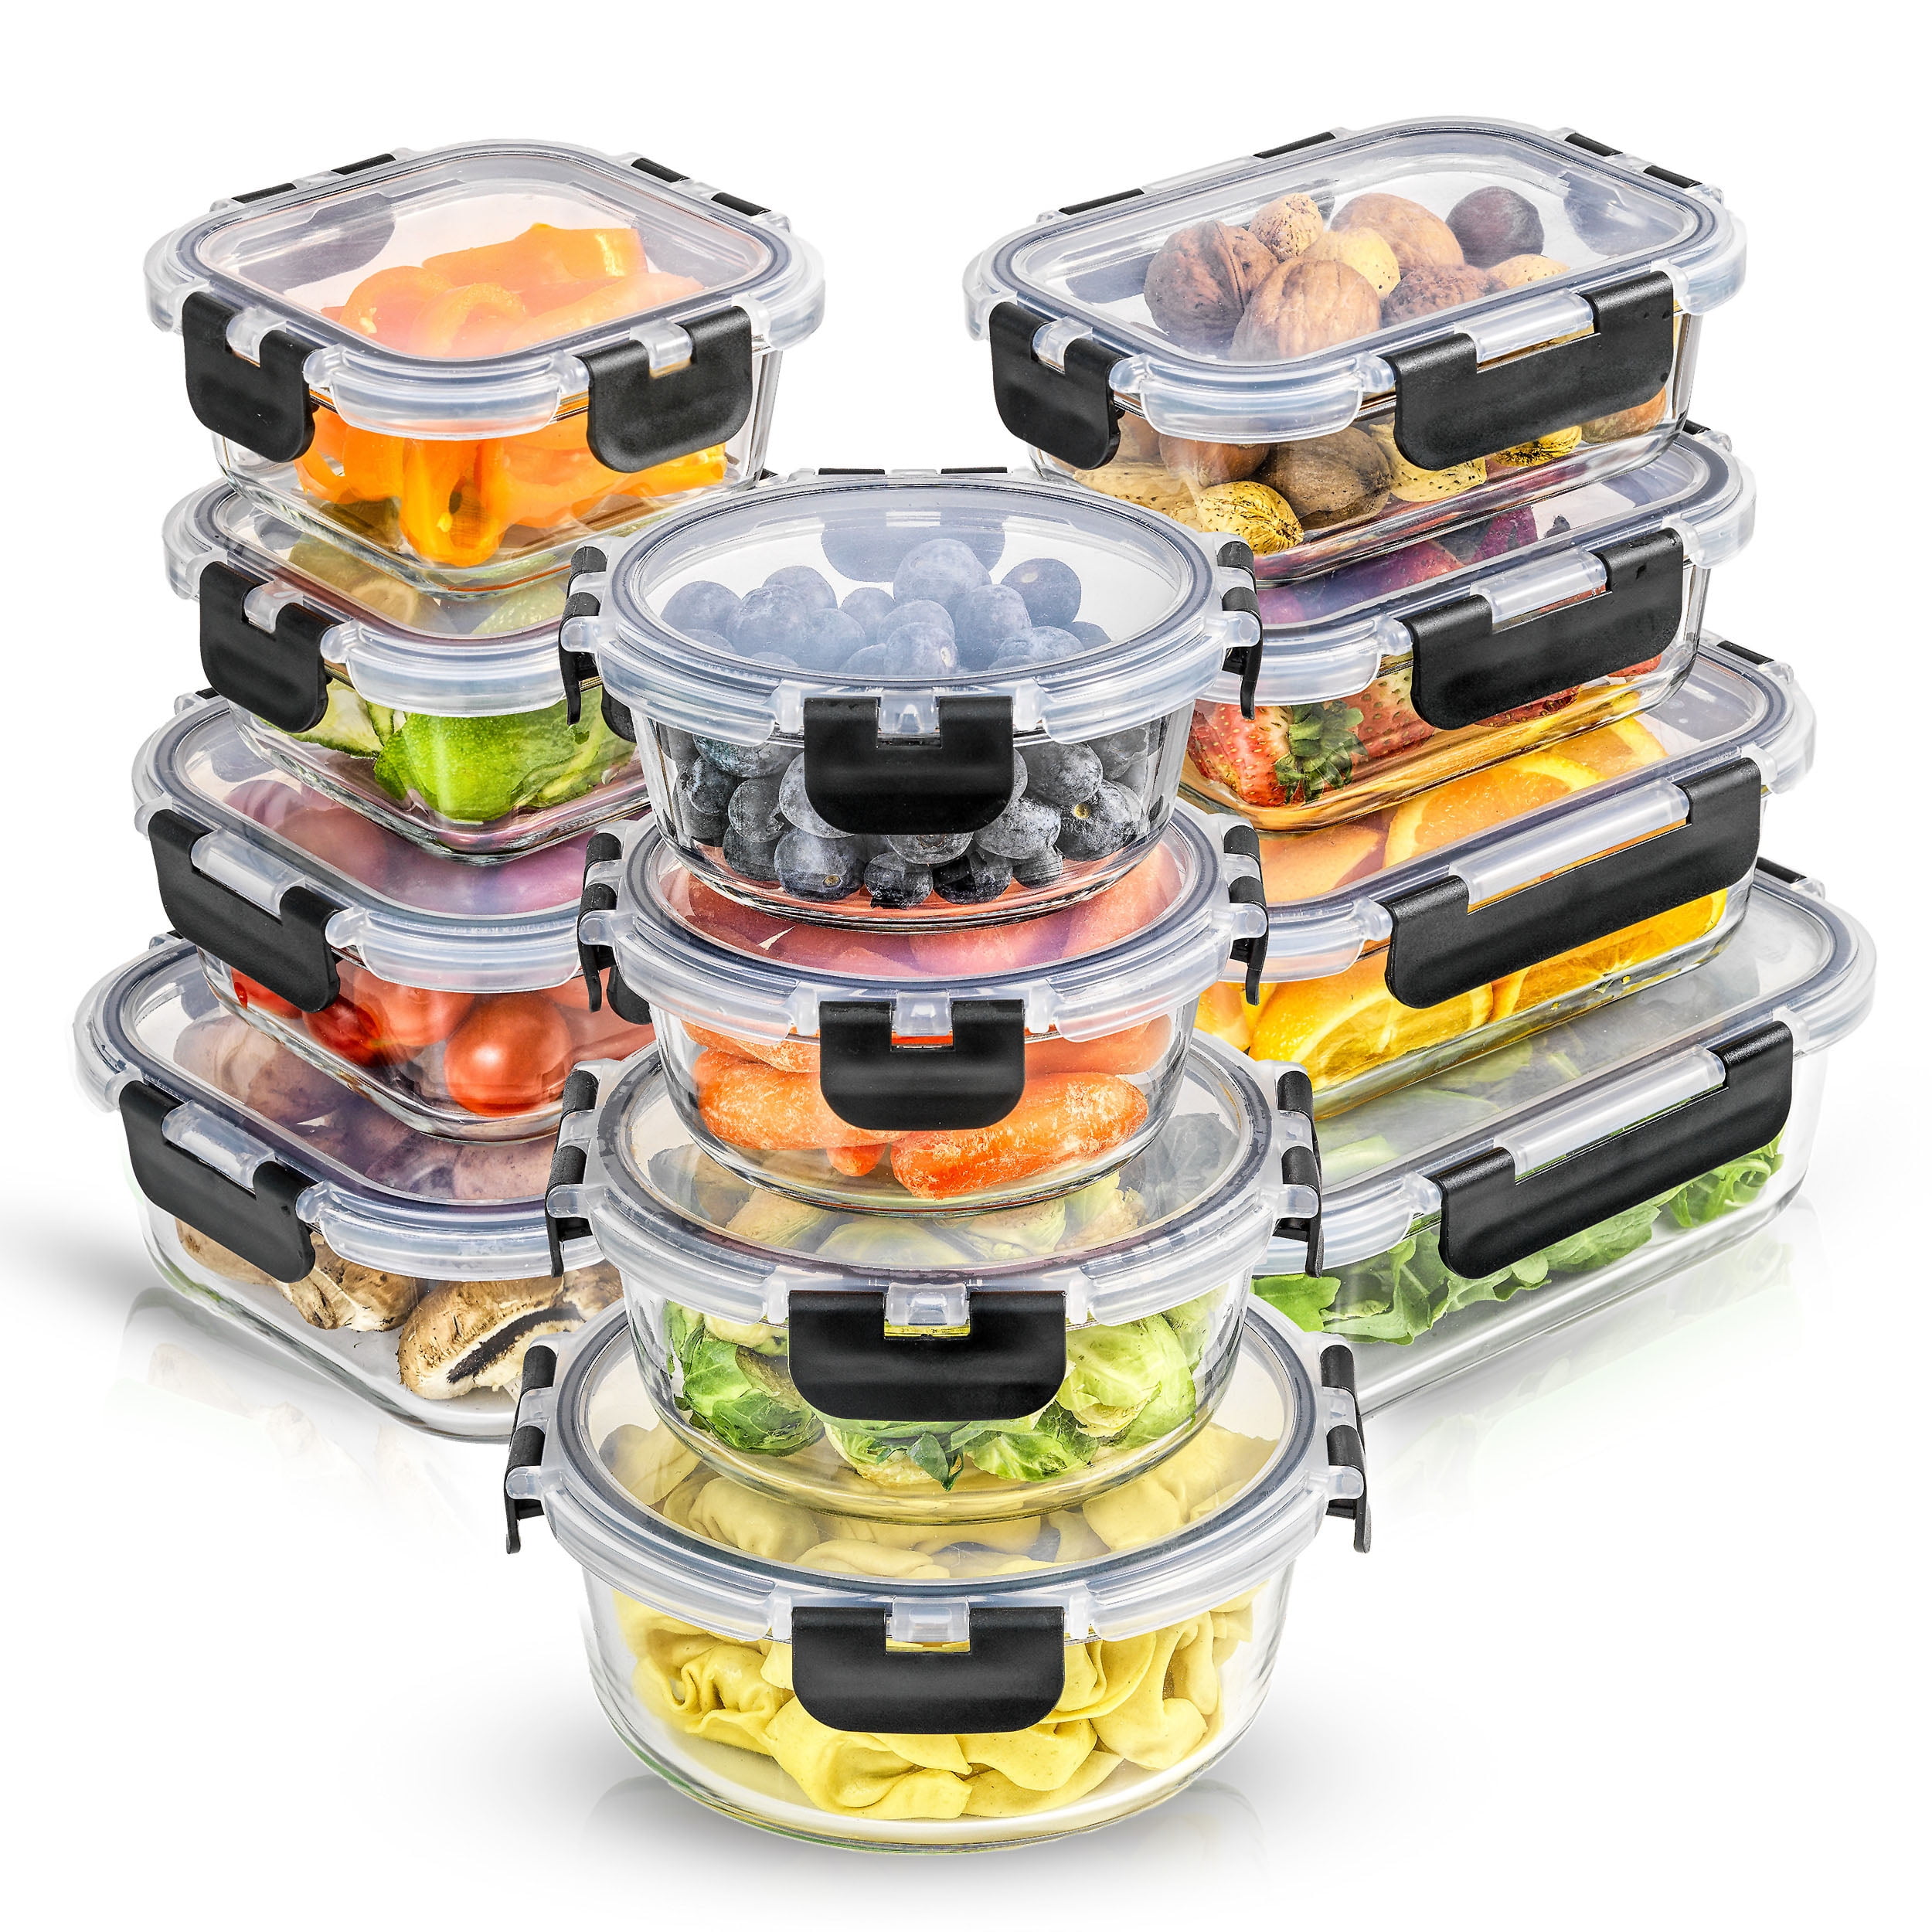 FineDine 24 Piece Glass Storage Containers with Lids - Leak Proof,  Dishwasher Safe Glass Food Storage Containers for Meal Prep or Leftovers,  Gray